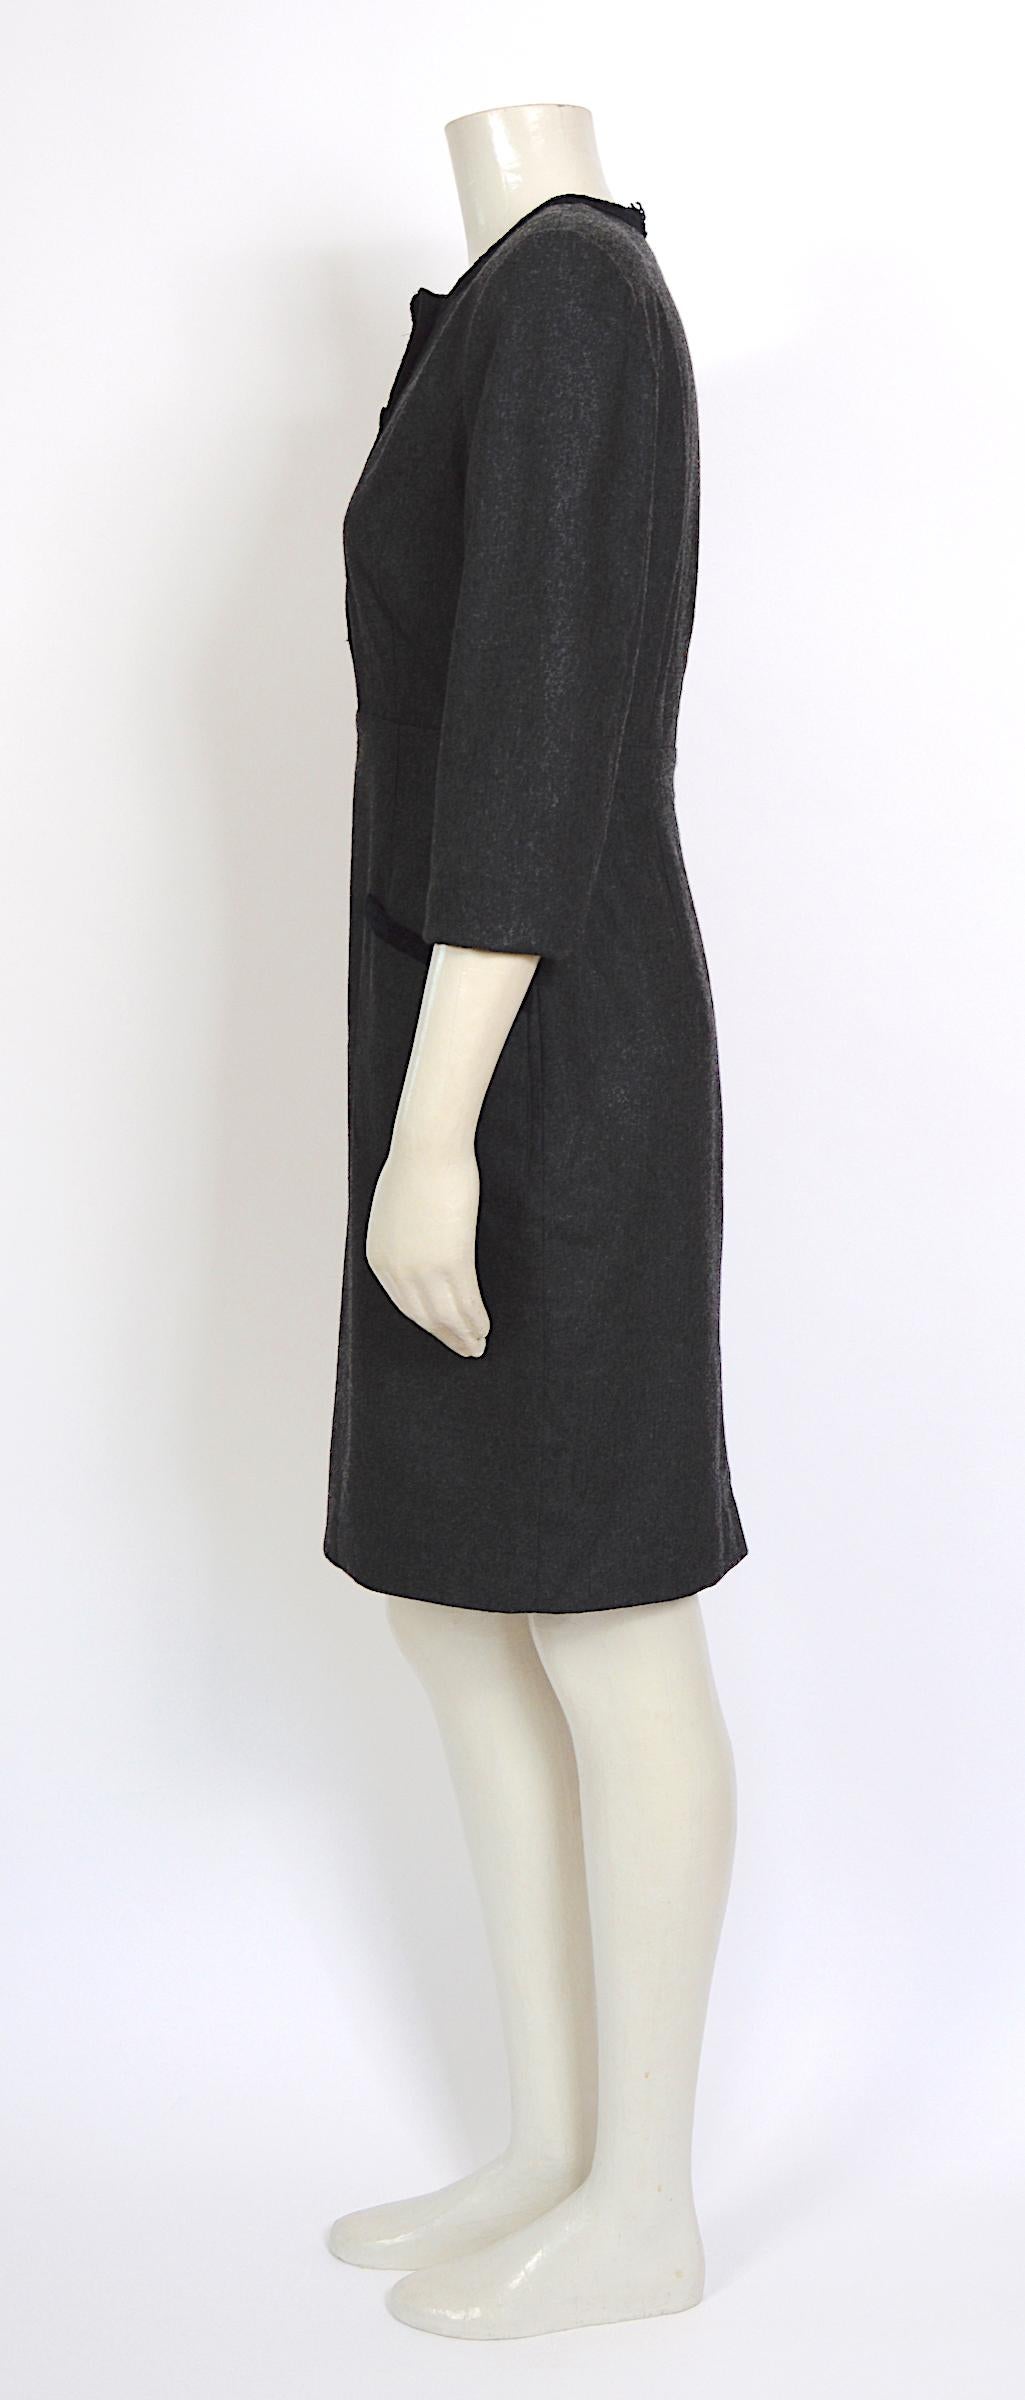 KL by Karl Lagerfeld 1980s grey cashmere & wool mix with KL logo buttons dress In Good Condition For Sale In Antwerpen, Vlaams Gewest